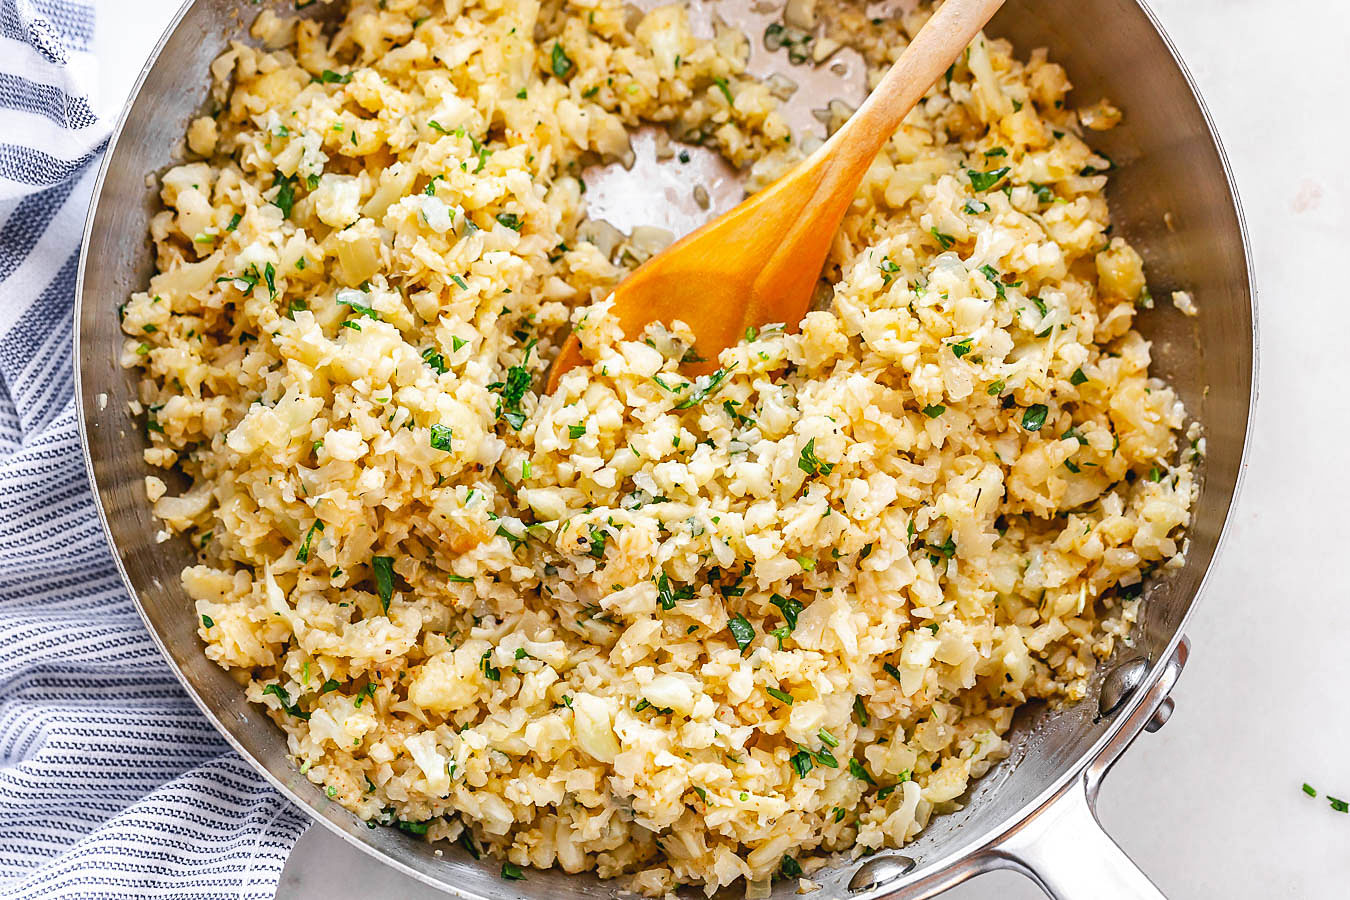 7 Healthy Low-Carb Cauliflower Recipes You Can Make in Less Than 15 minutes